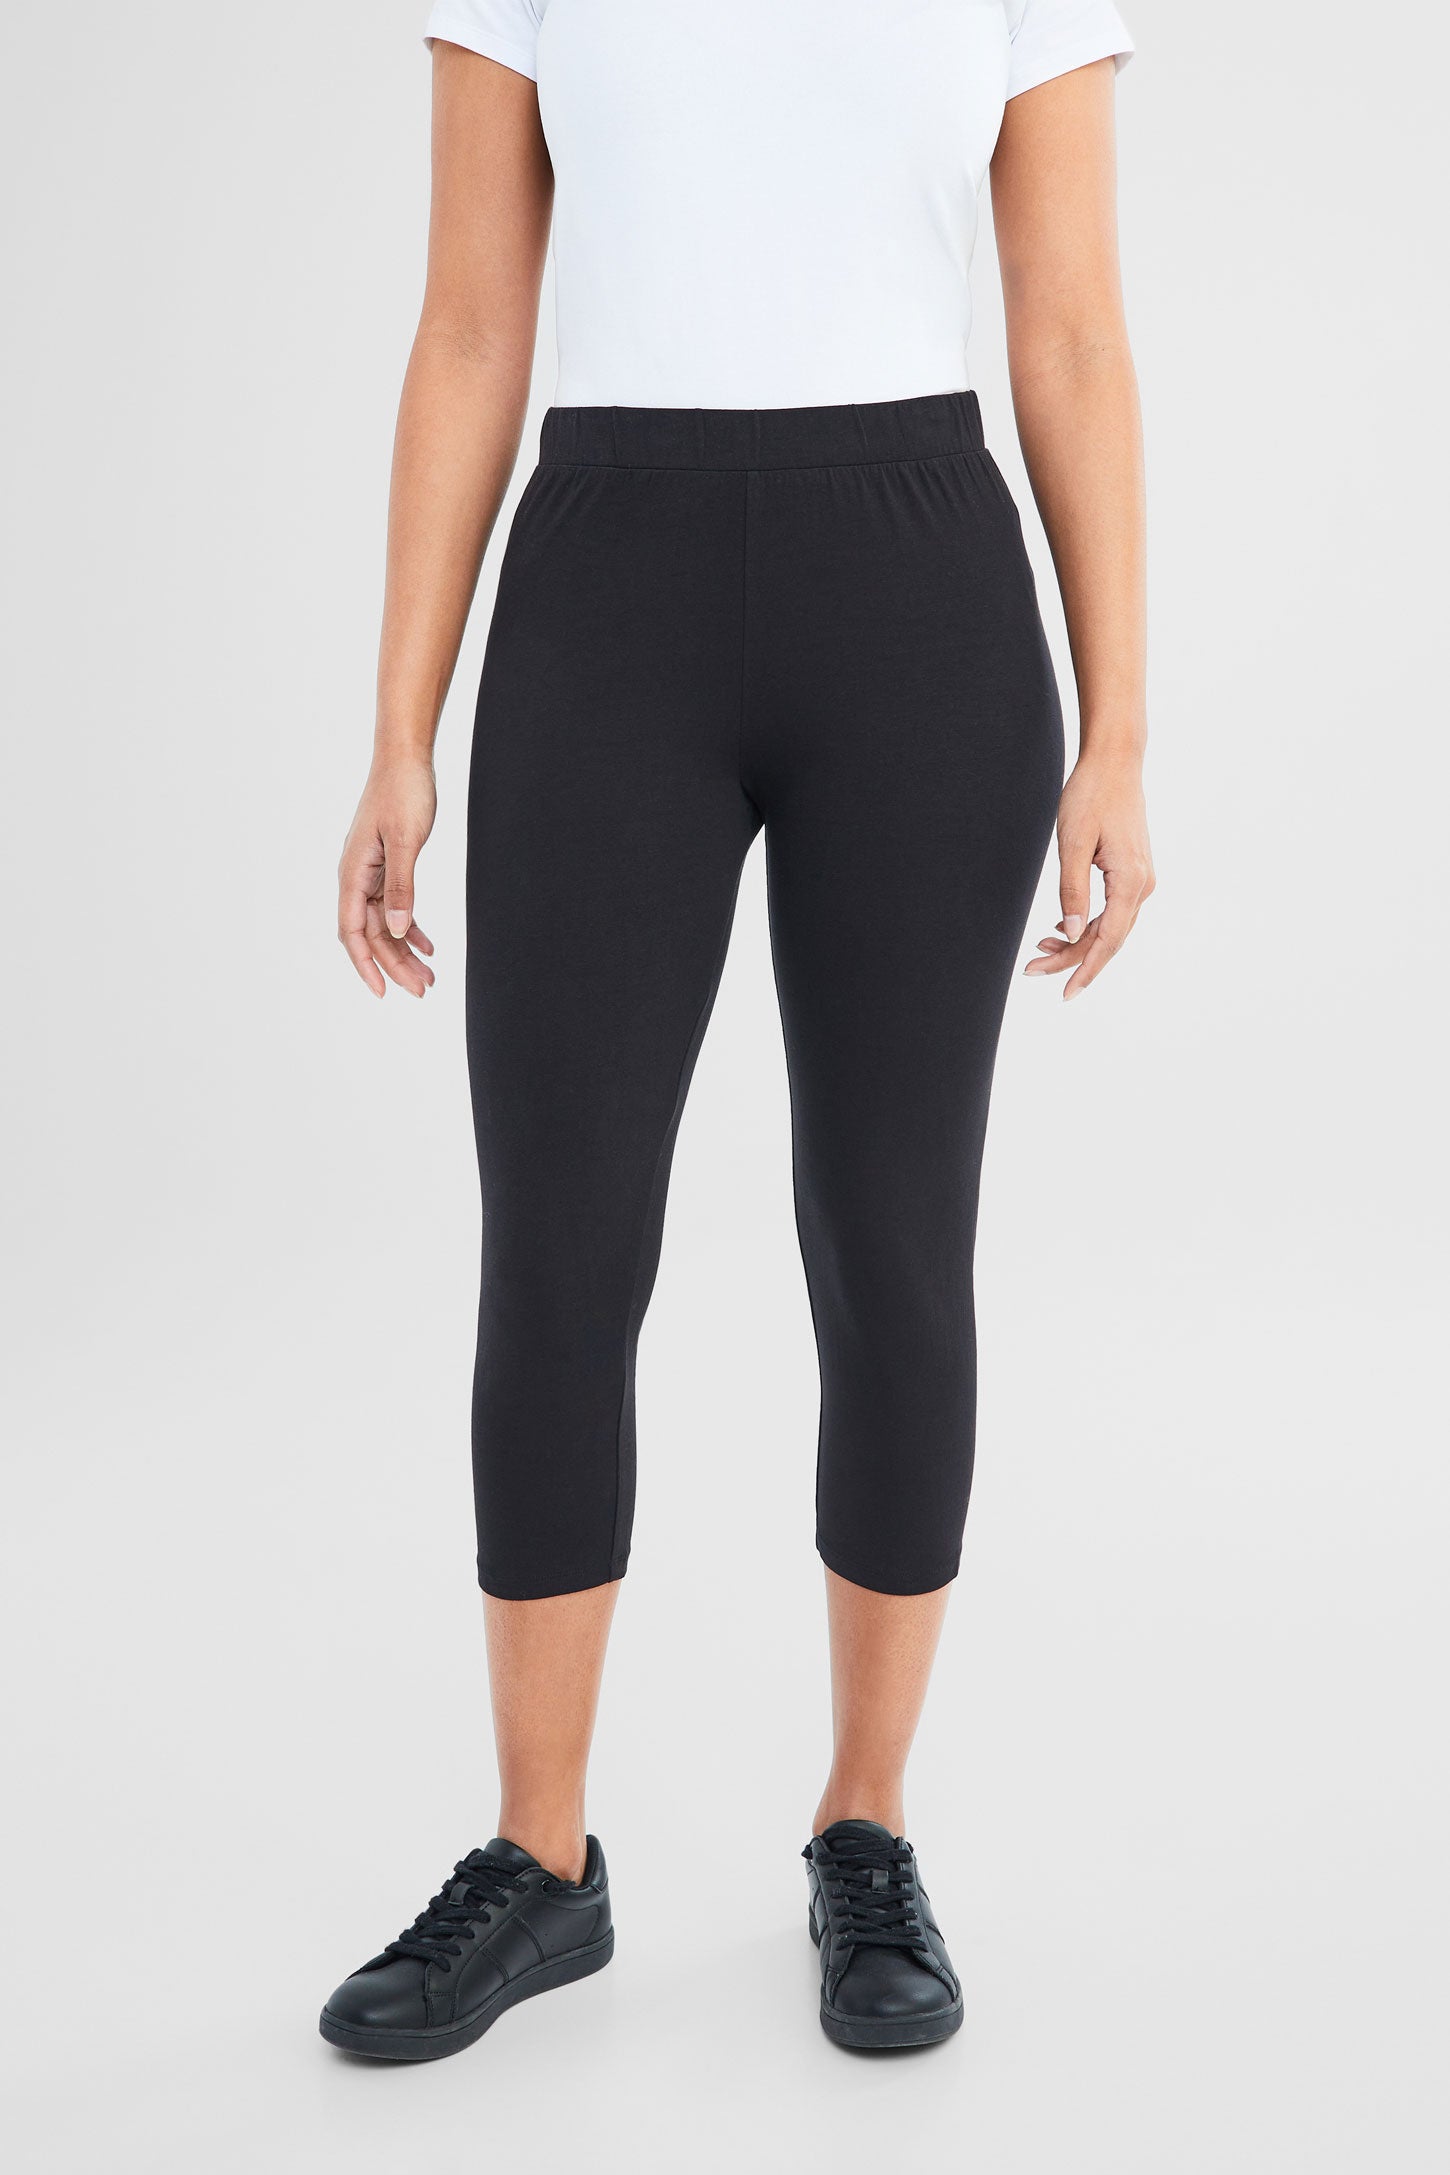 Cropped 3/4 Lenght Cotton Leggings with Lace